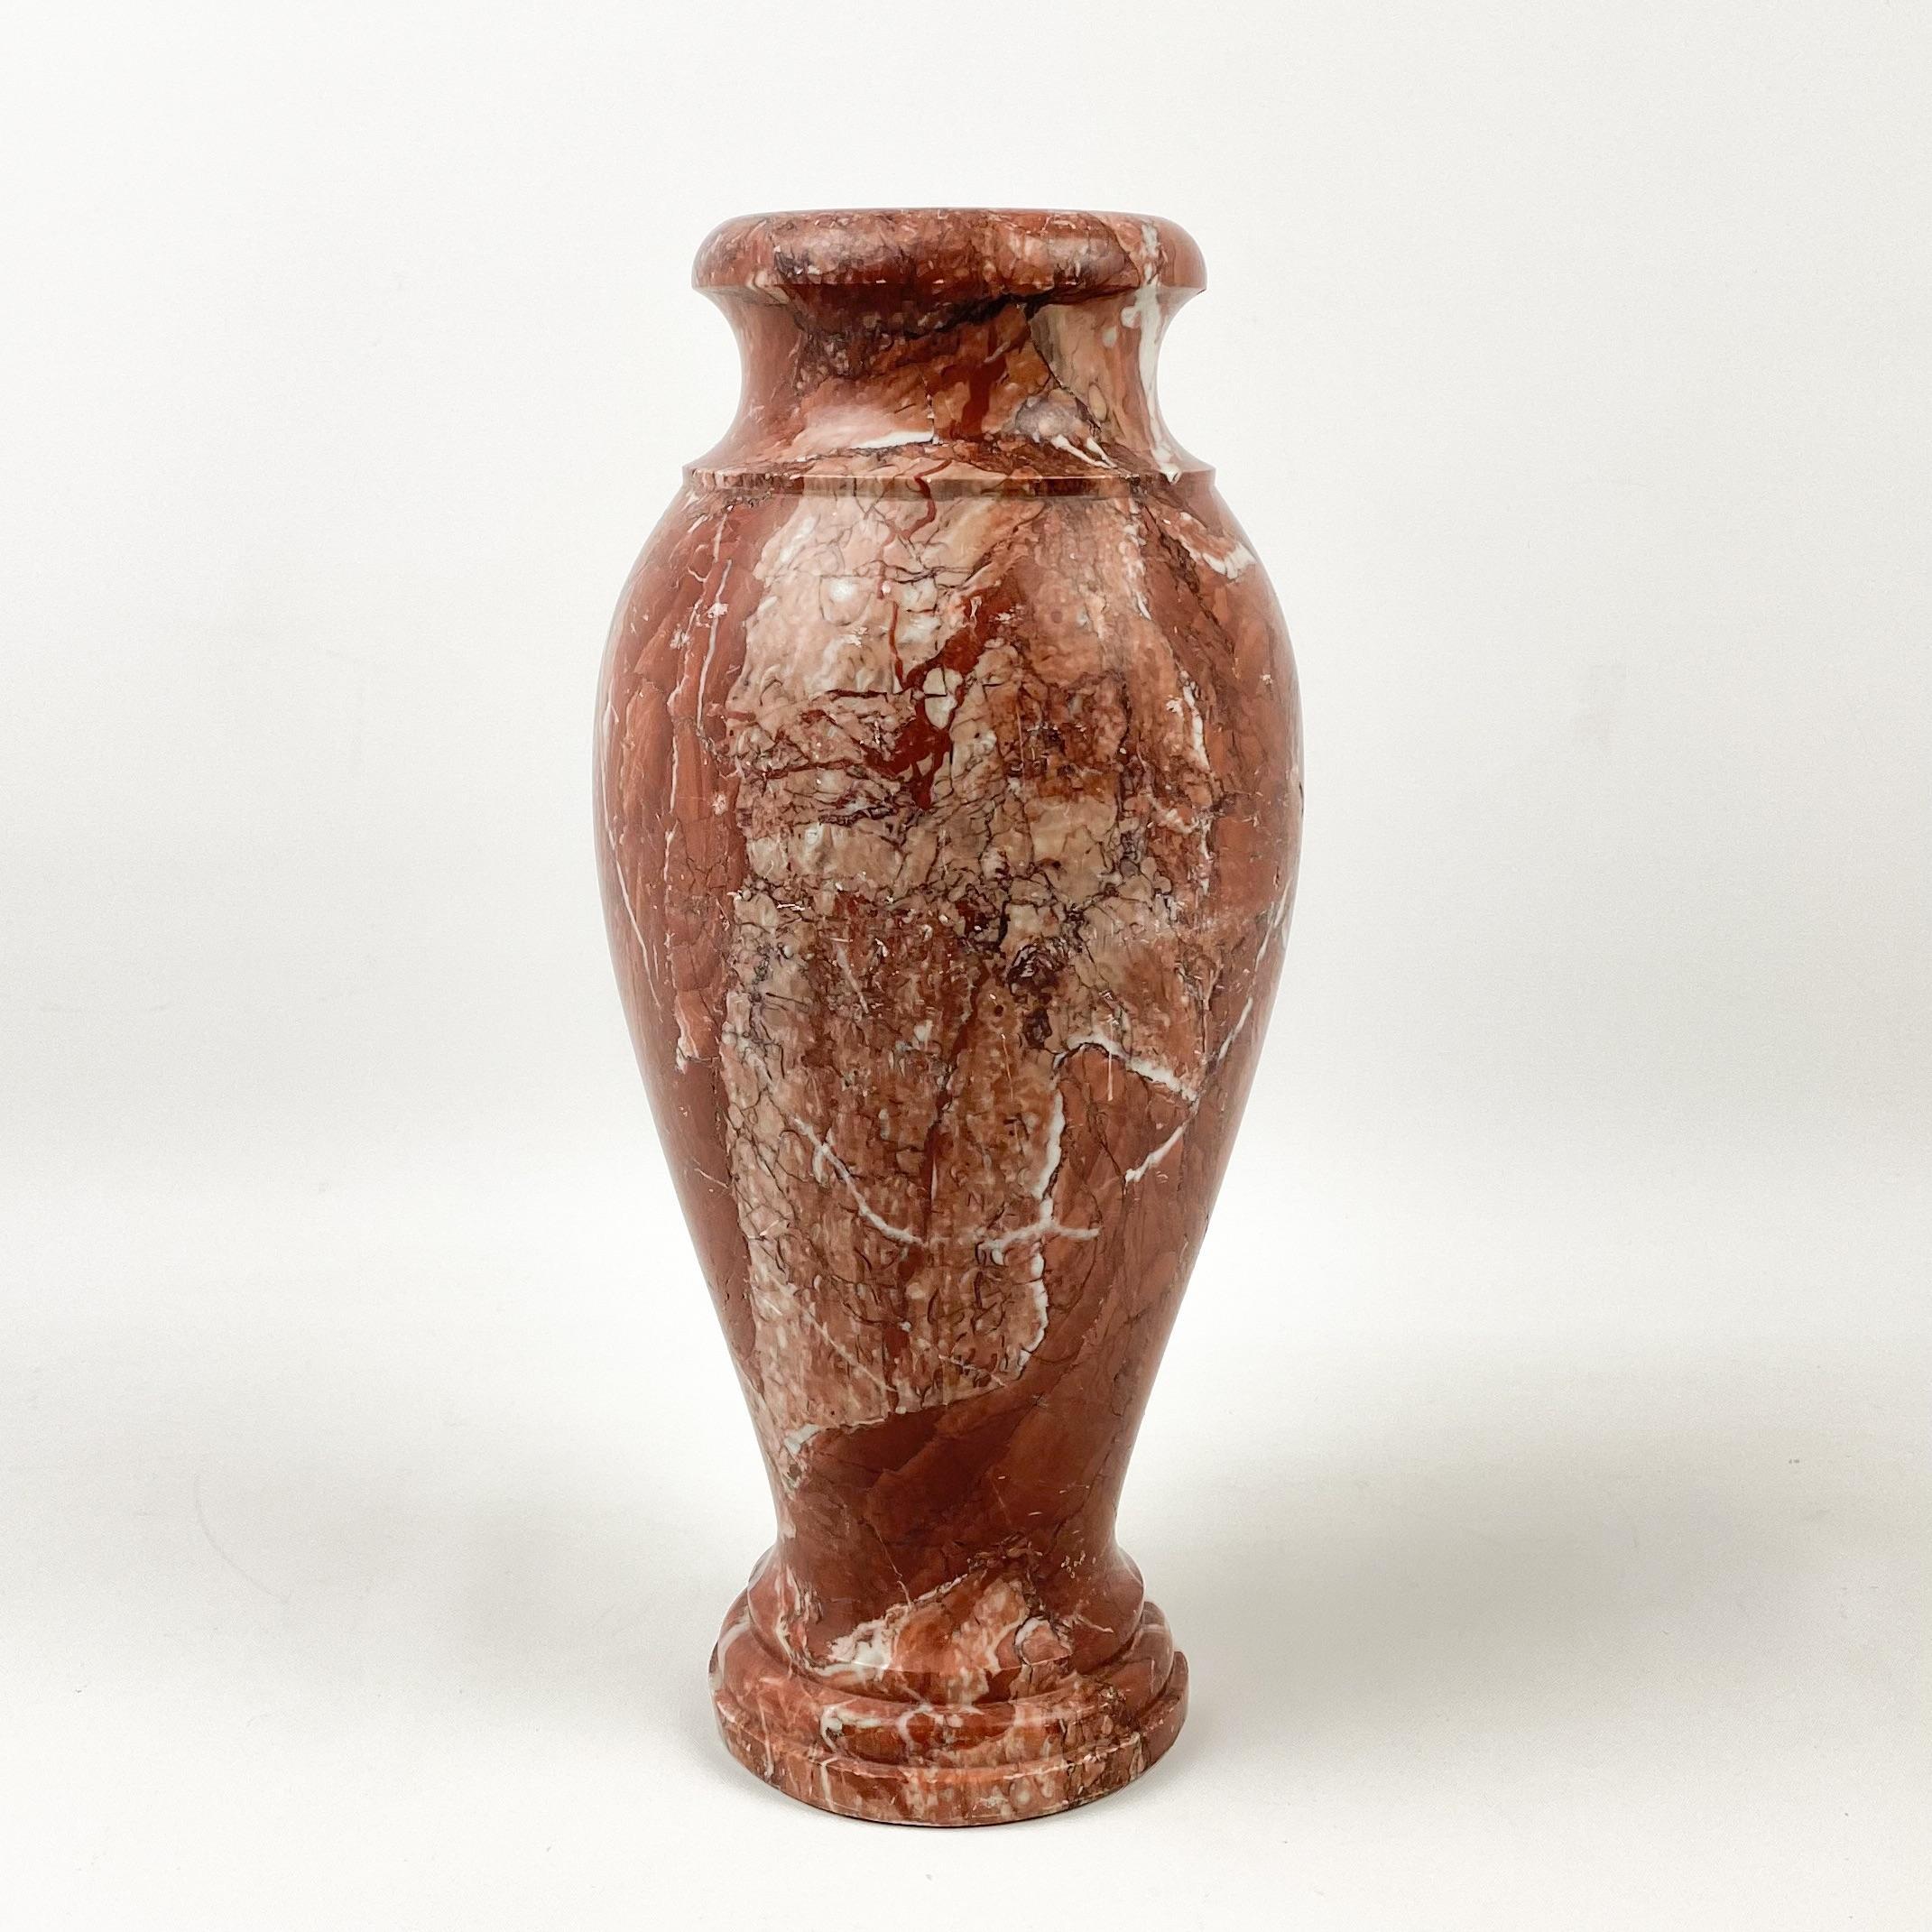 Vintage circa 1980s red/rouge zebra marble vase. Neoclassical design with great veining throughout marble. Heavy and carved out of one solid piece of marble. Excellent condition.